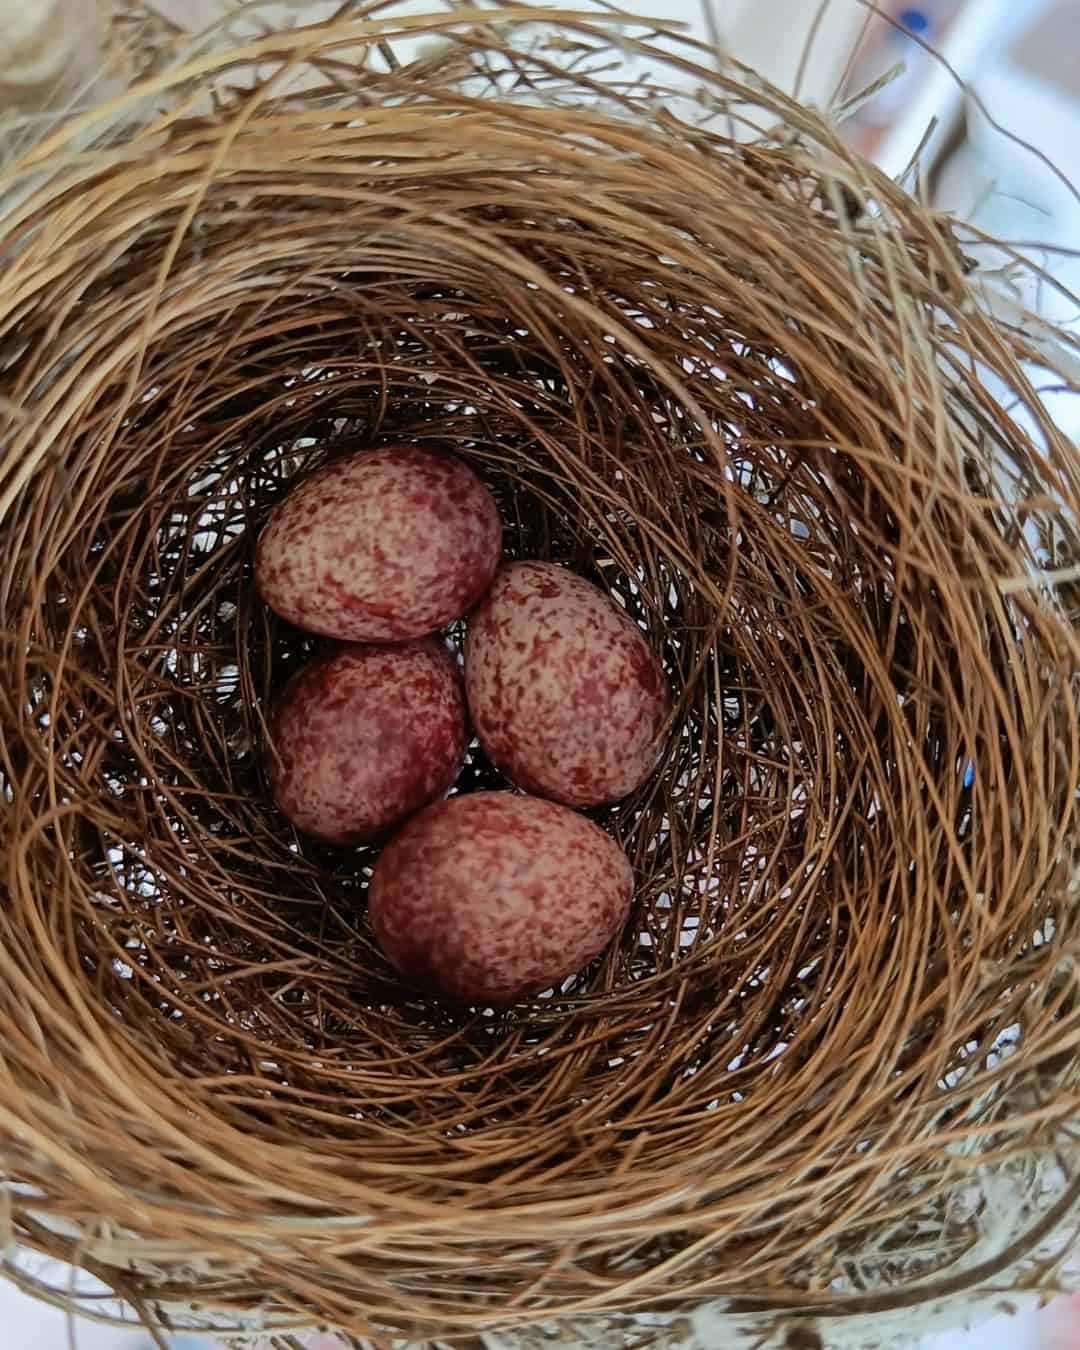 How to Identify House Sparrow Eggs